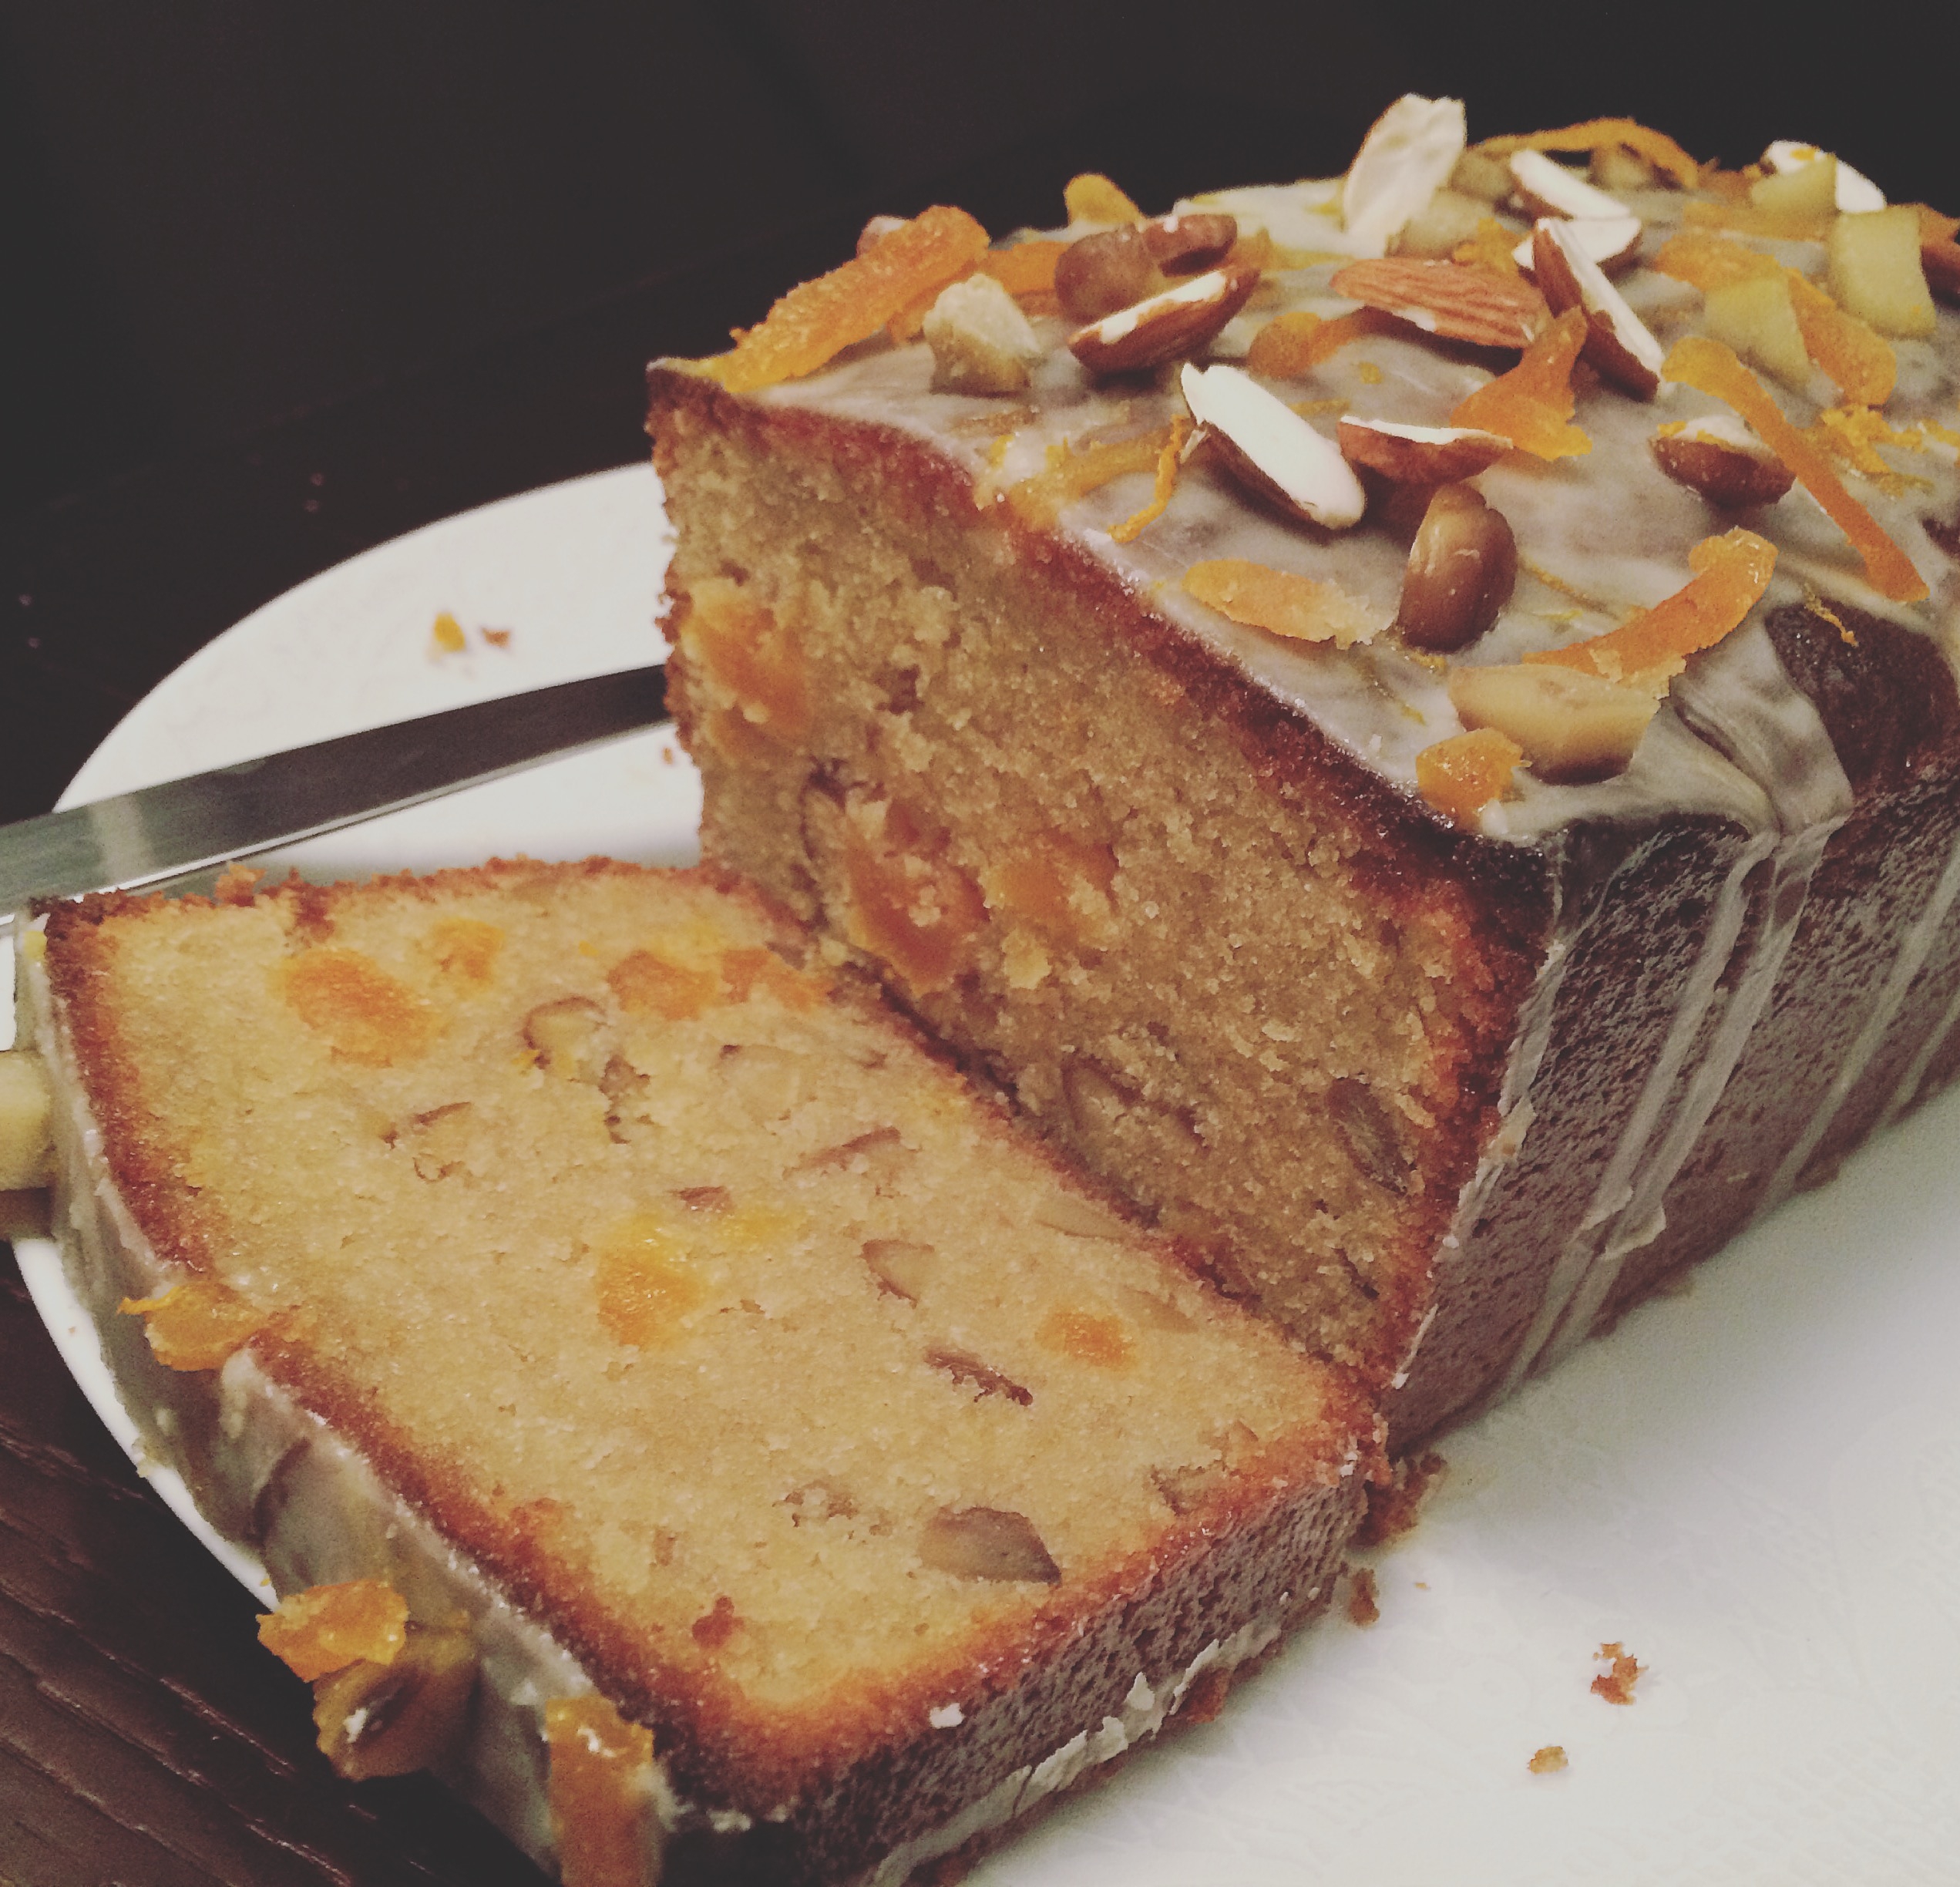 Apricot Chestnut and Coffee Cake